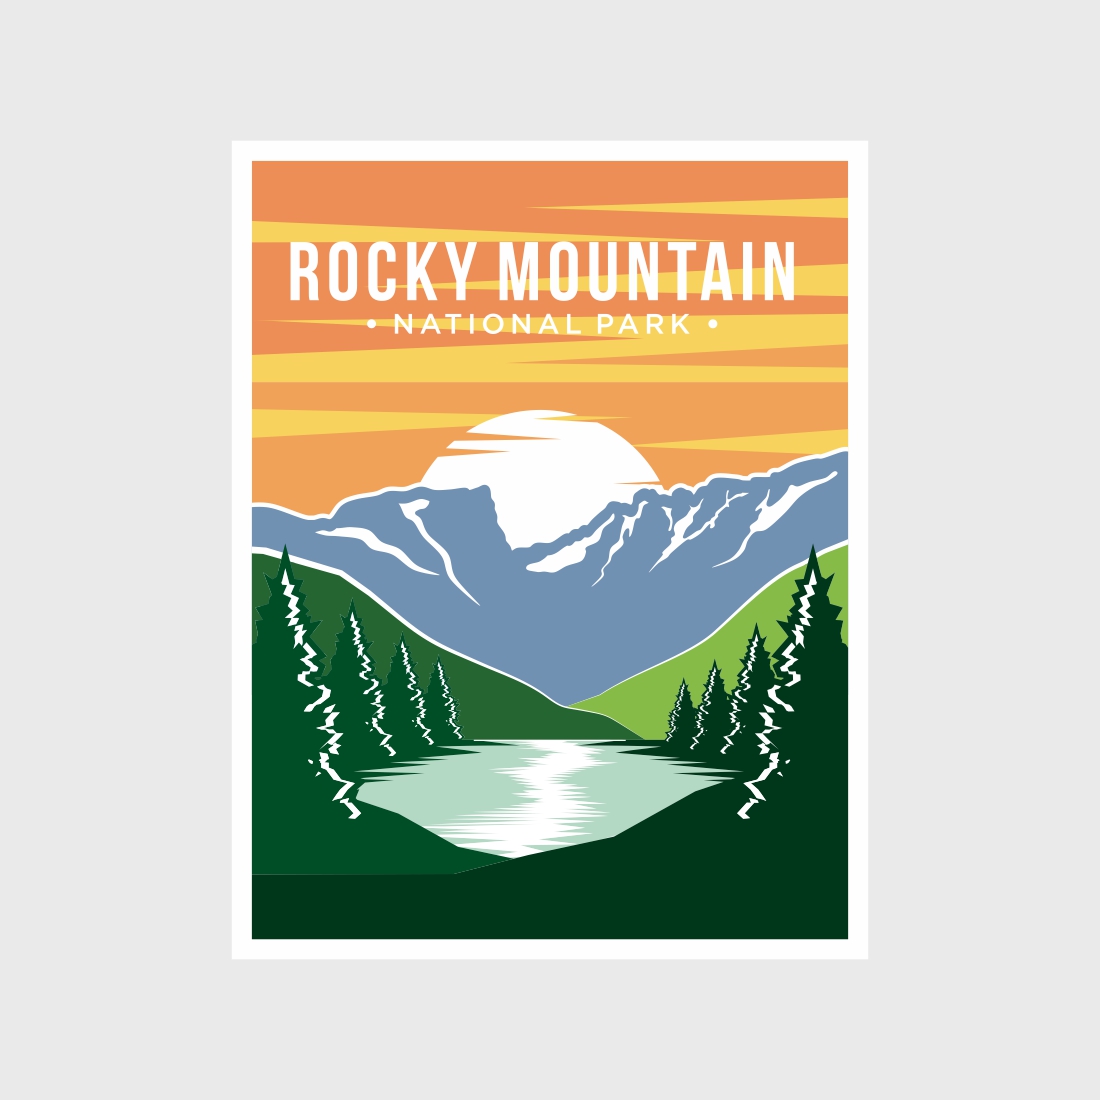 Rocky Mountain National Park poster vector illustration, beautiful mountains and river landscape poster - only $11 preview image.